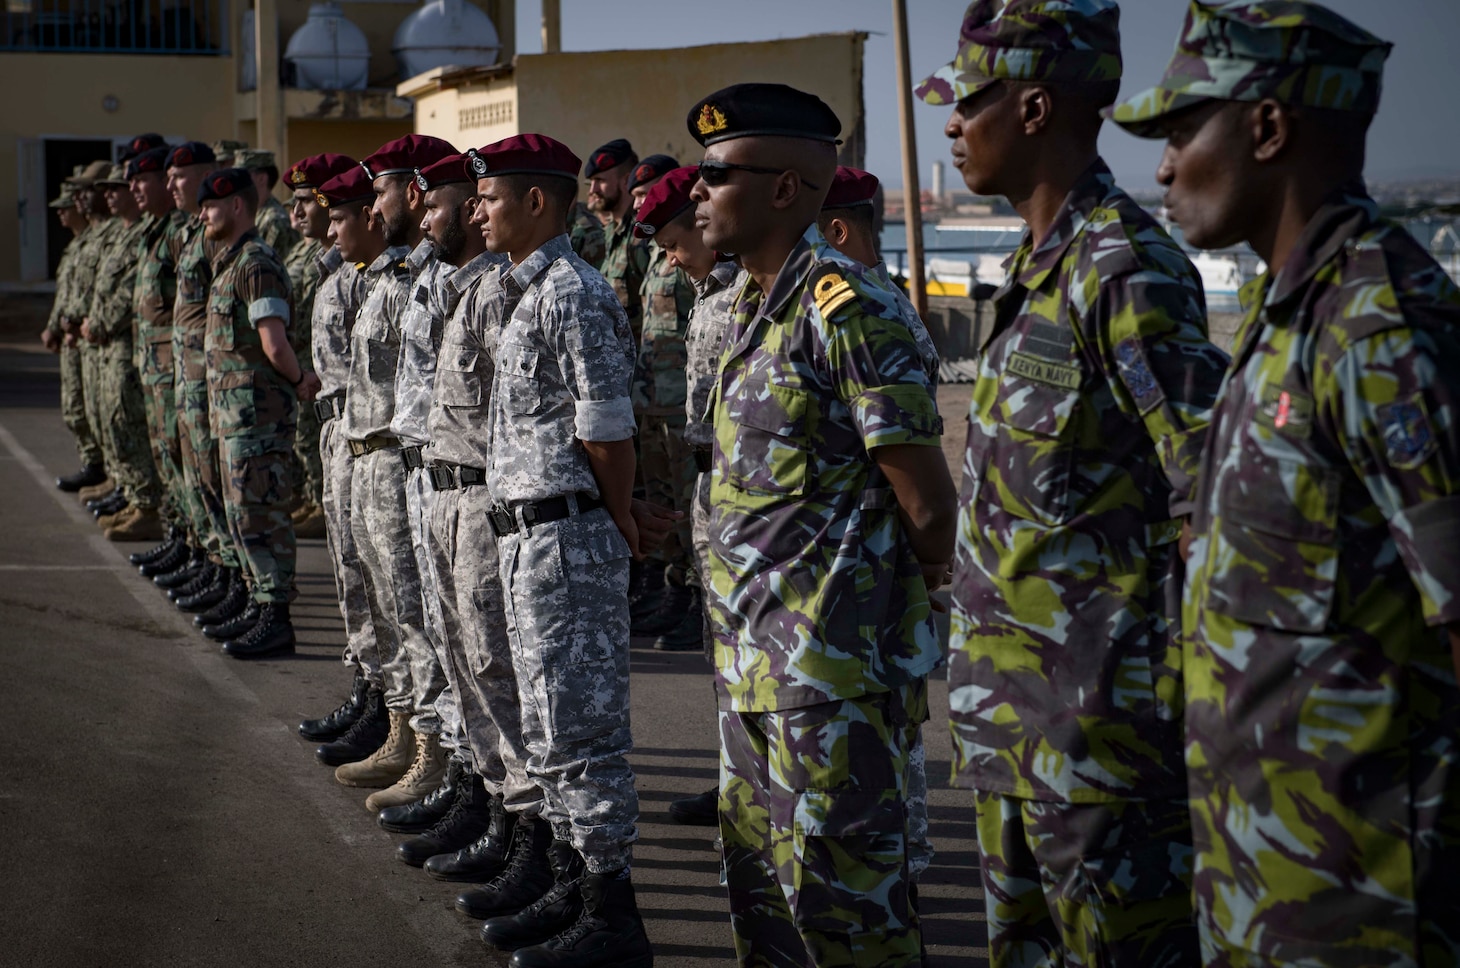 Sailors from the U.S., Indian, Comorian, Kenyan, Djiboutian and Somali navies along with U.S. Coast Guard sailors and Royal Netherlands Marines gather for the closing ceremony of exercise Cutlass Express 2019 in Djibouti, Feb. 6, 2019.